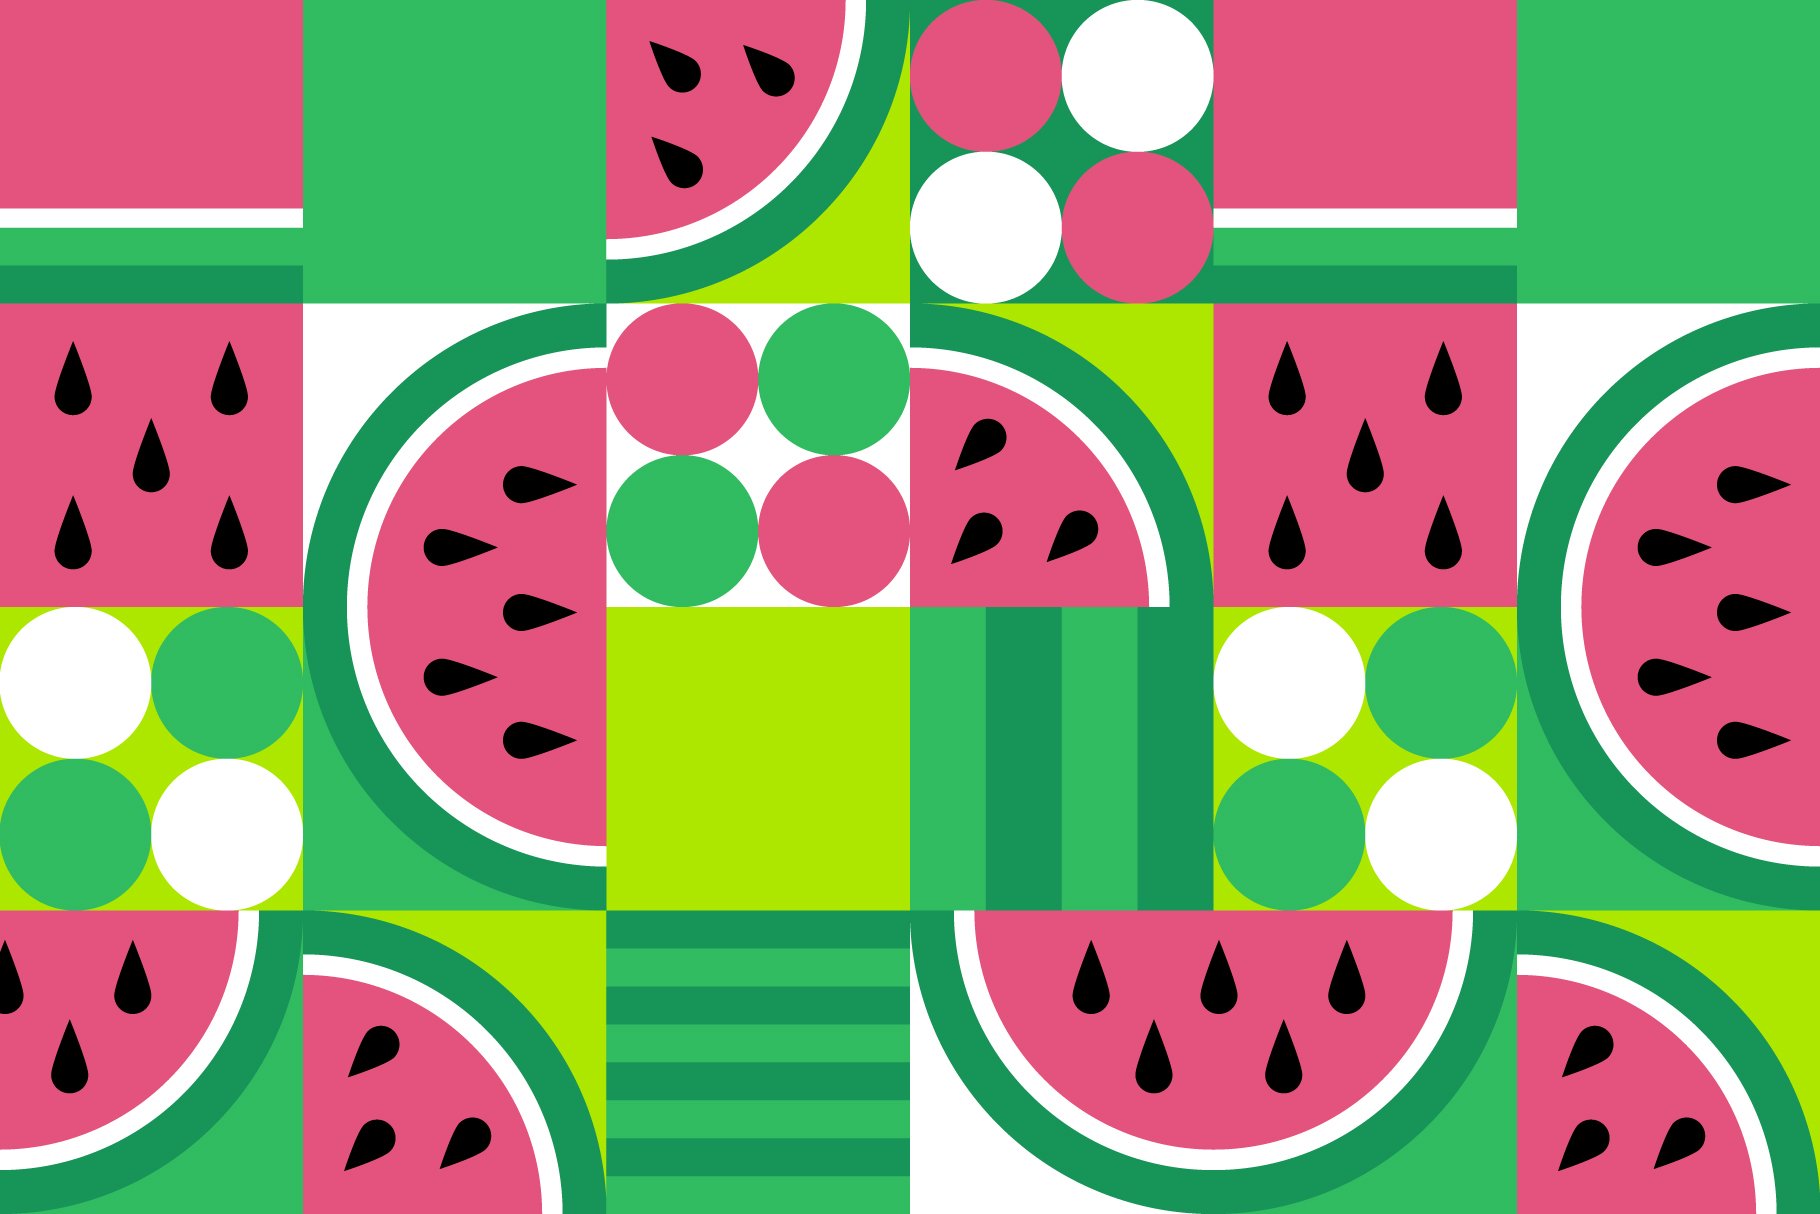 Geometric Watermelons pattern. cover image.